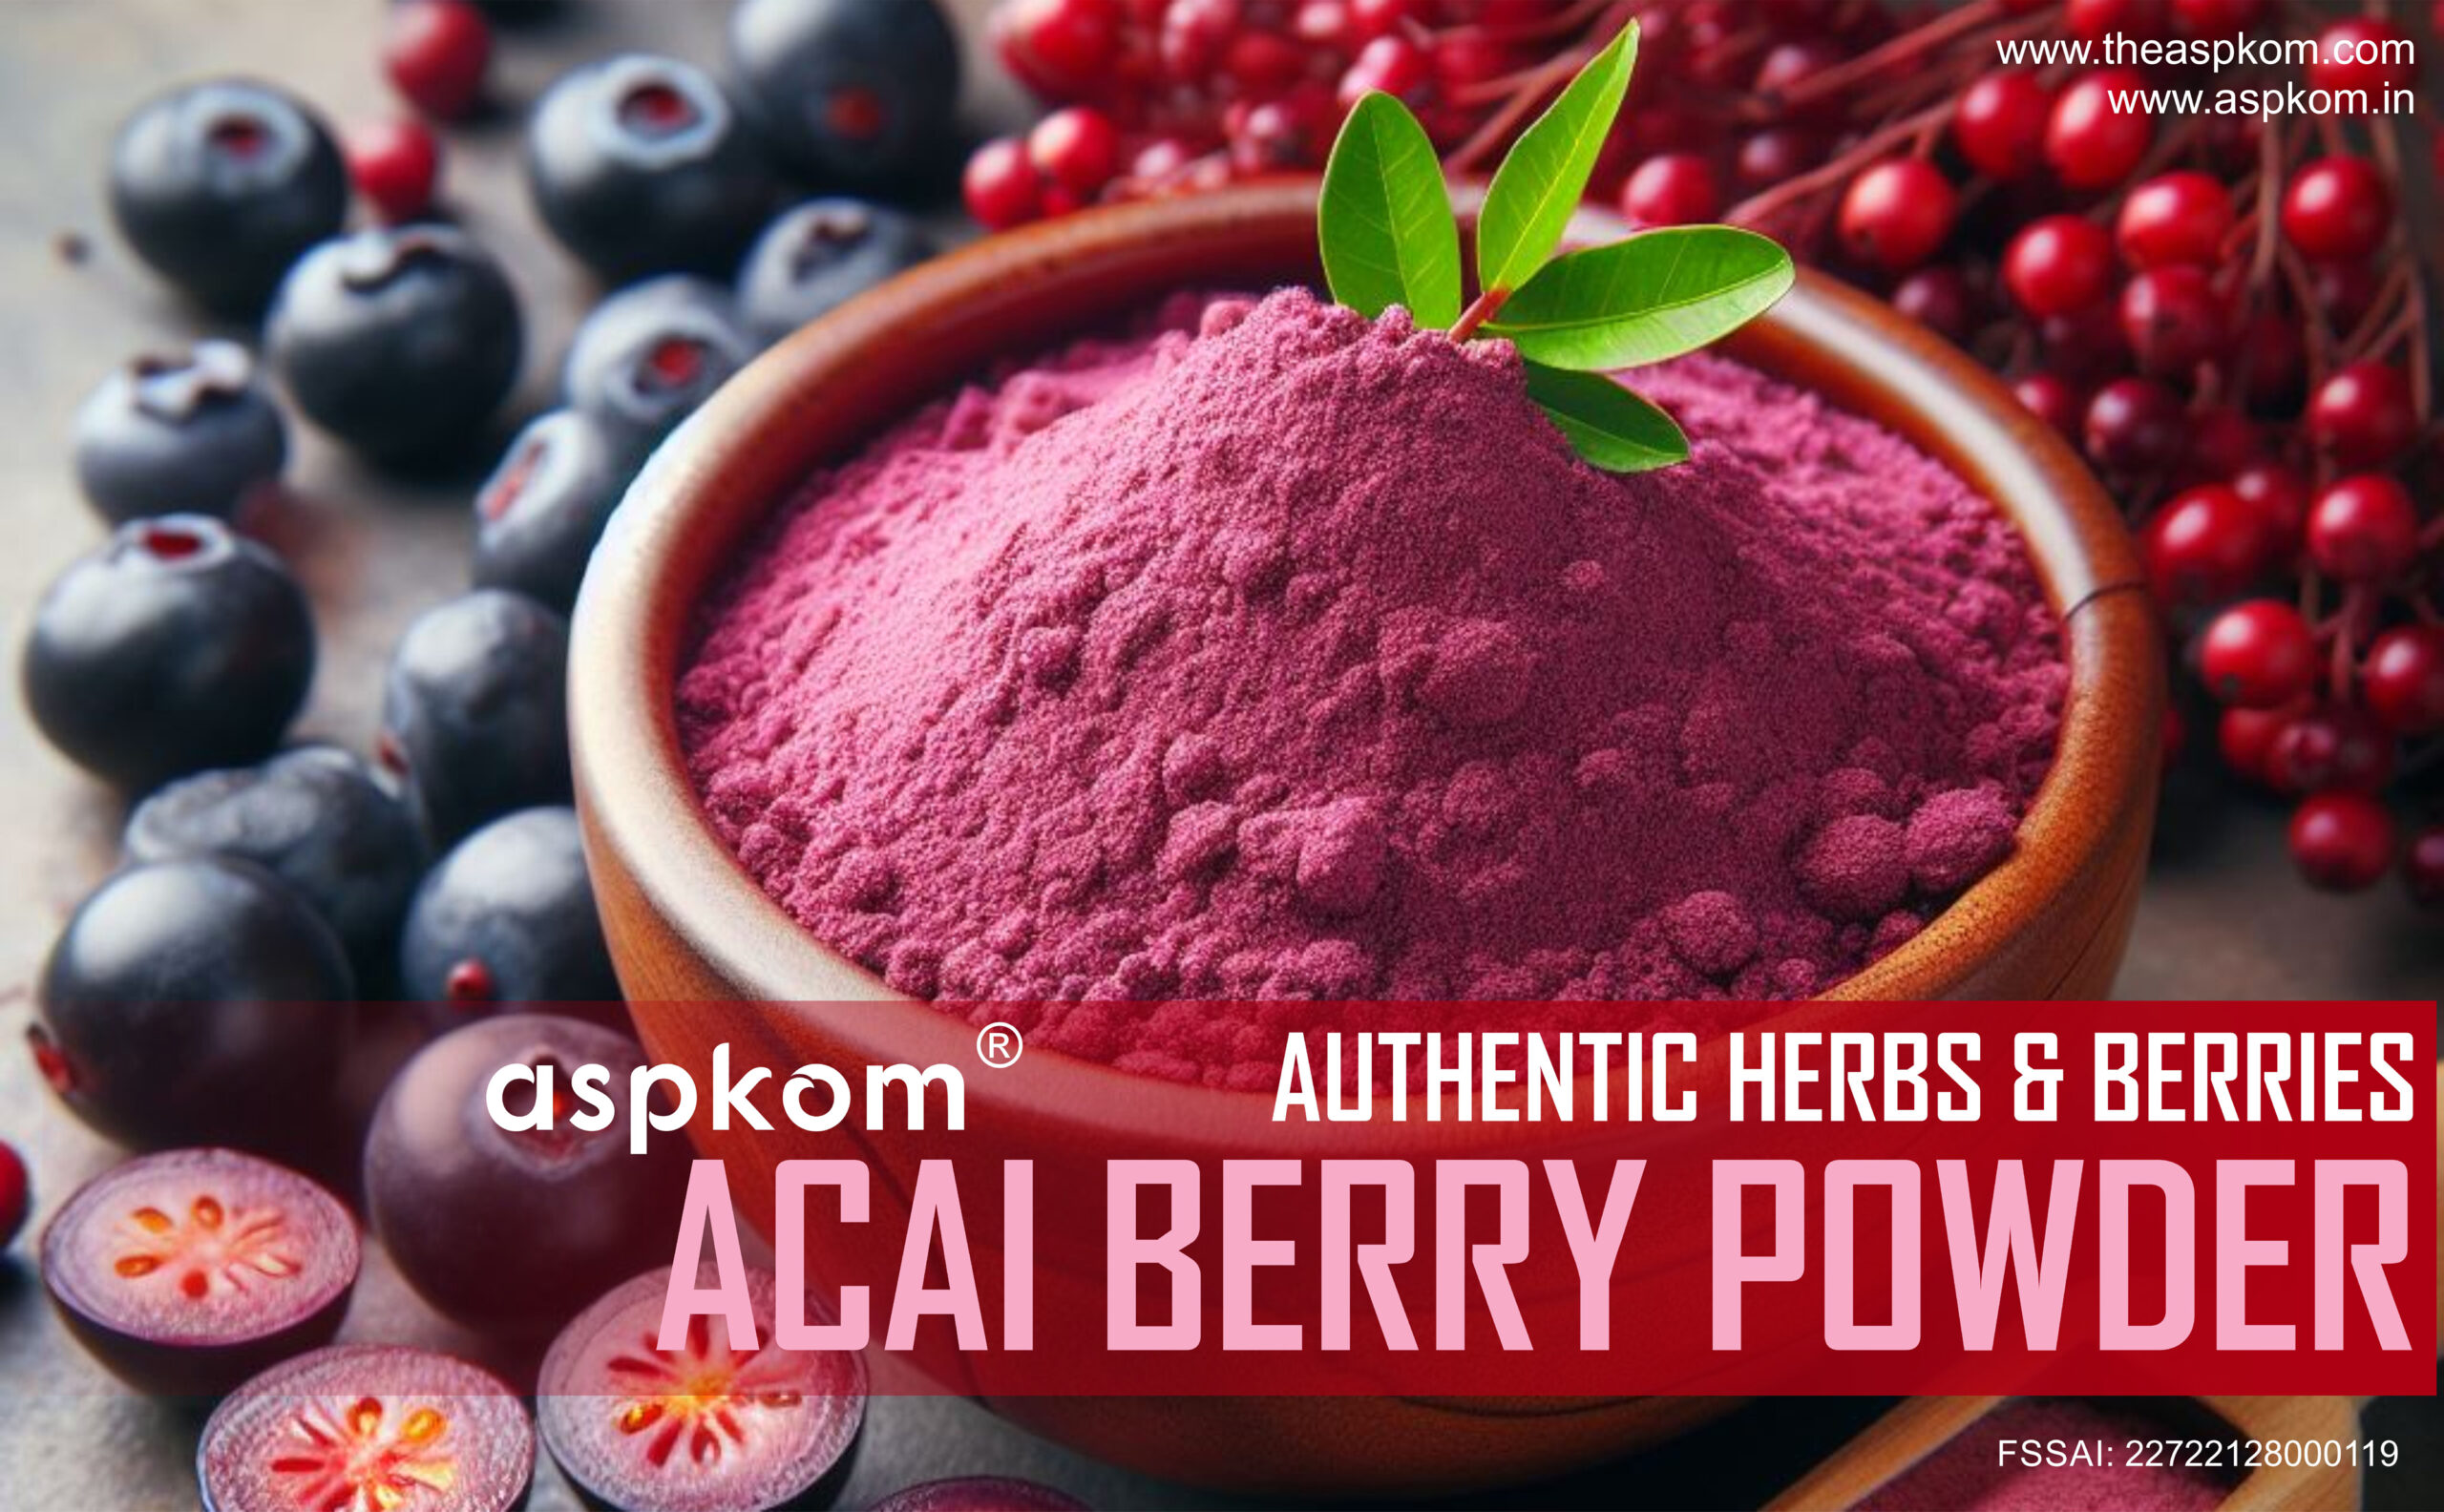 acai berries powder rich in antioxidants and nutrients